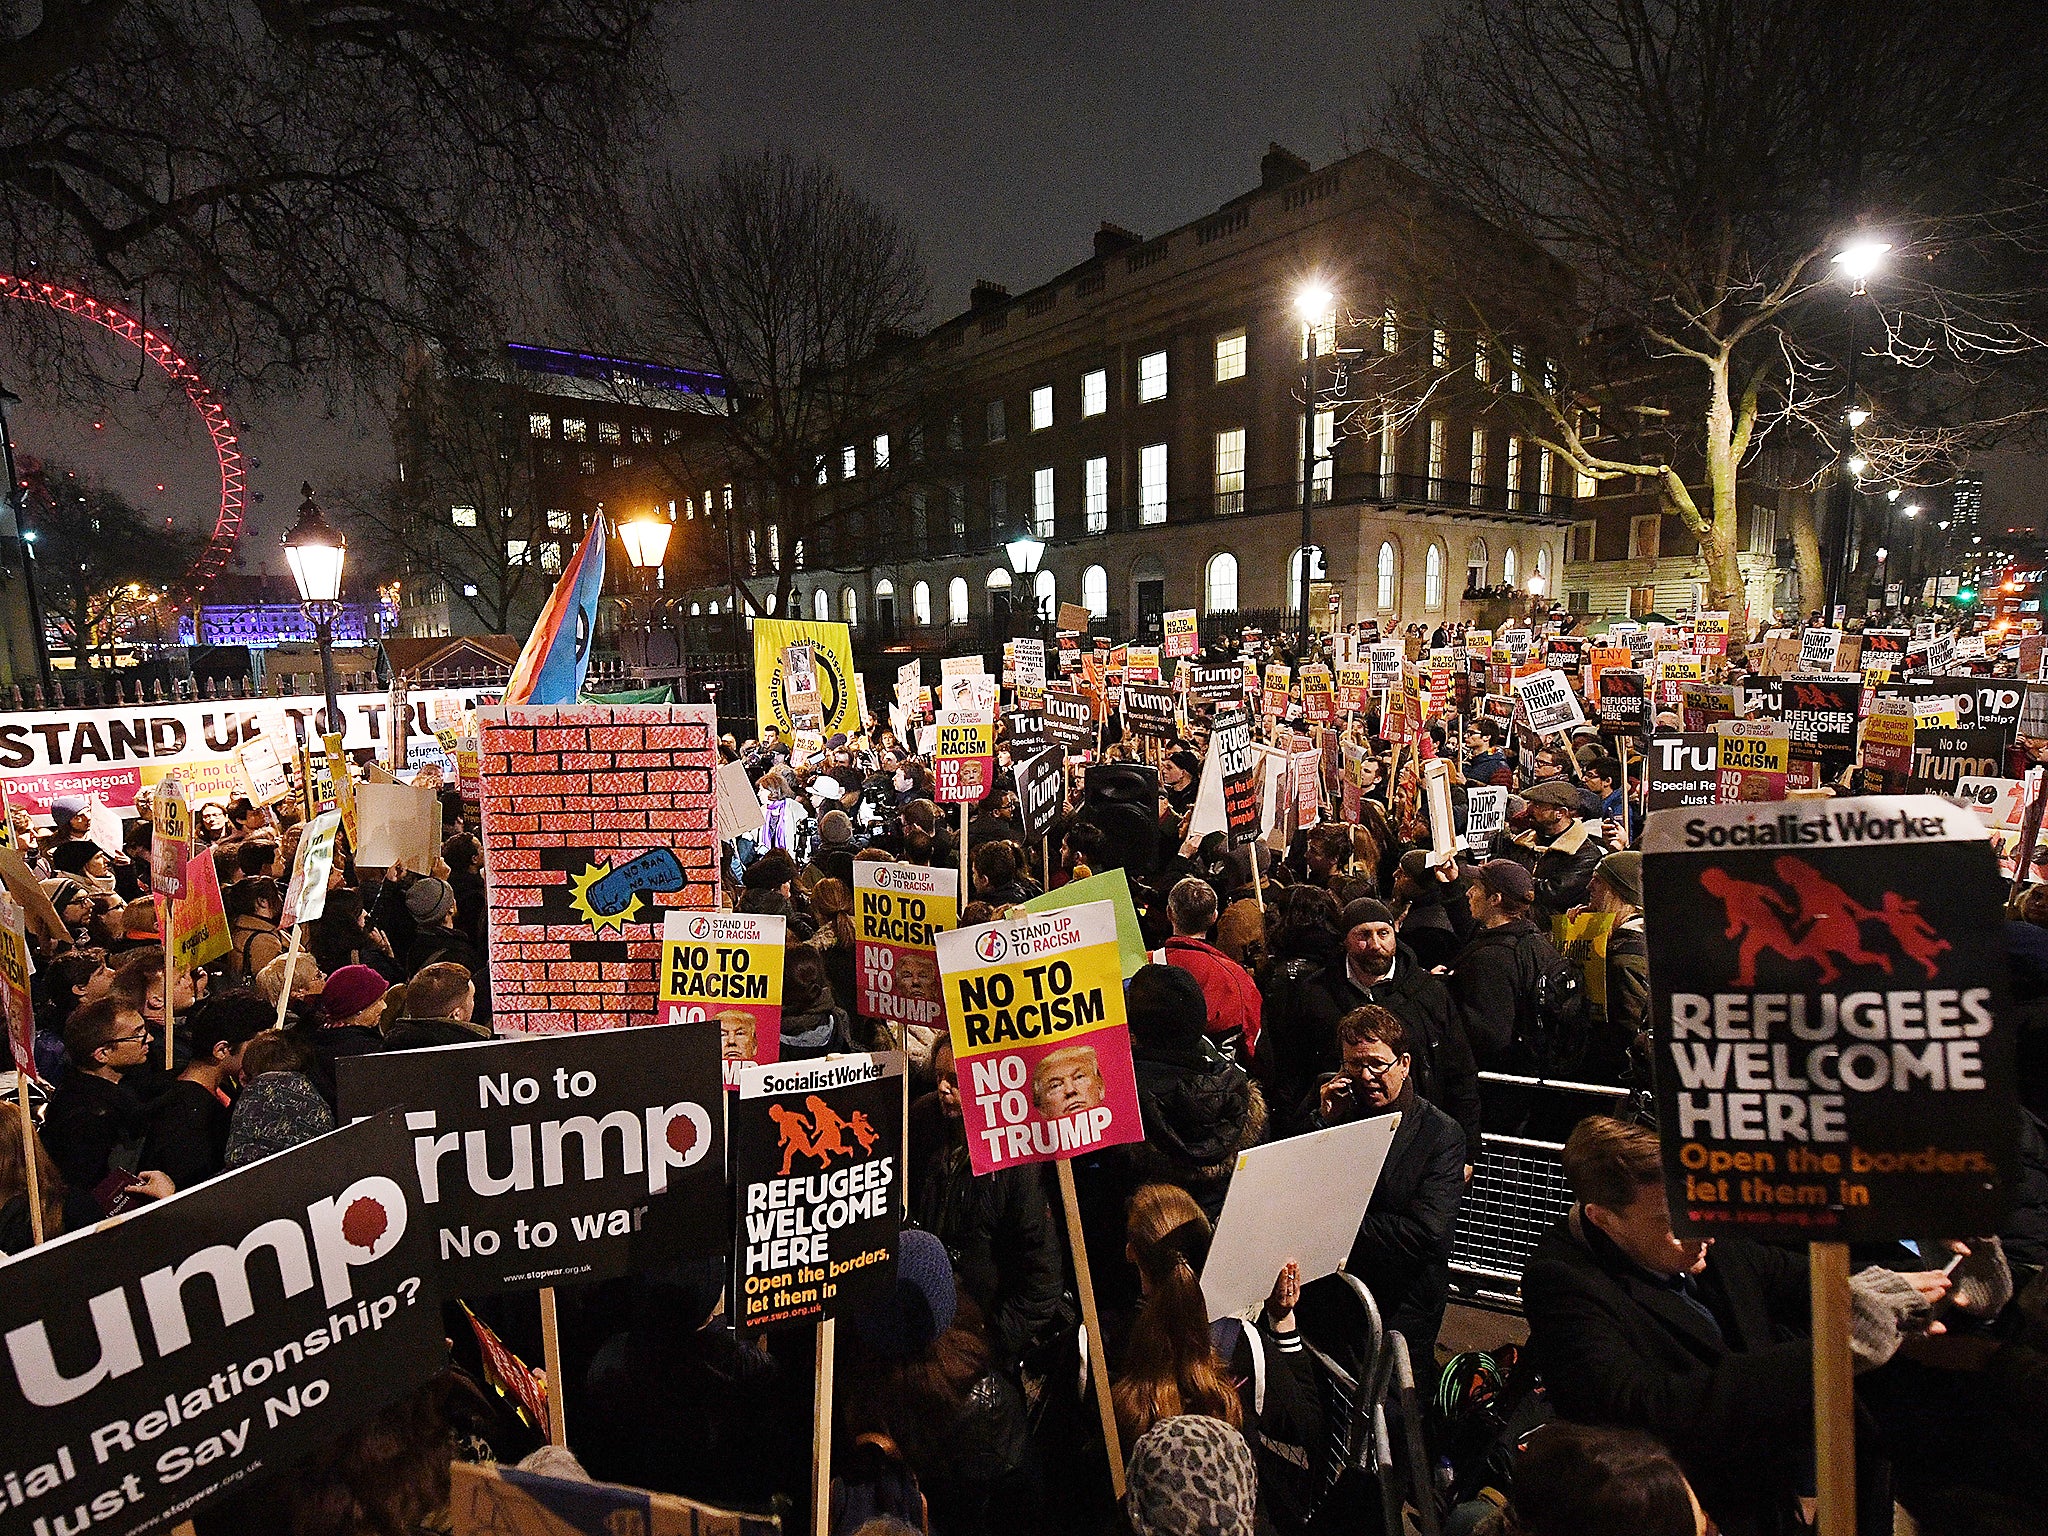 Stand Up To Racism, which also helped organise Monday's London march (pictured), is protesting Theresa May's state invite to Mr Trump